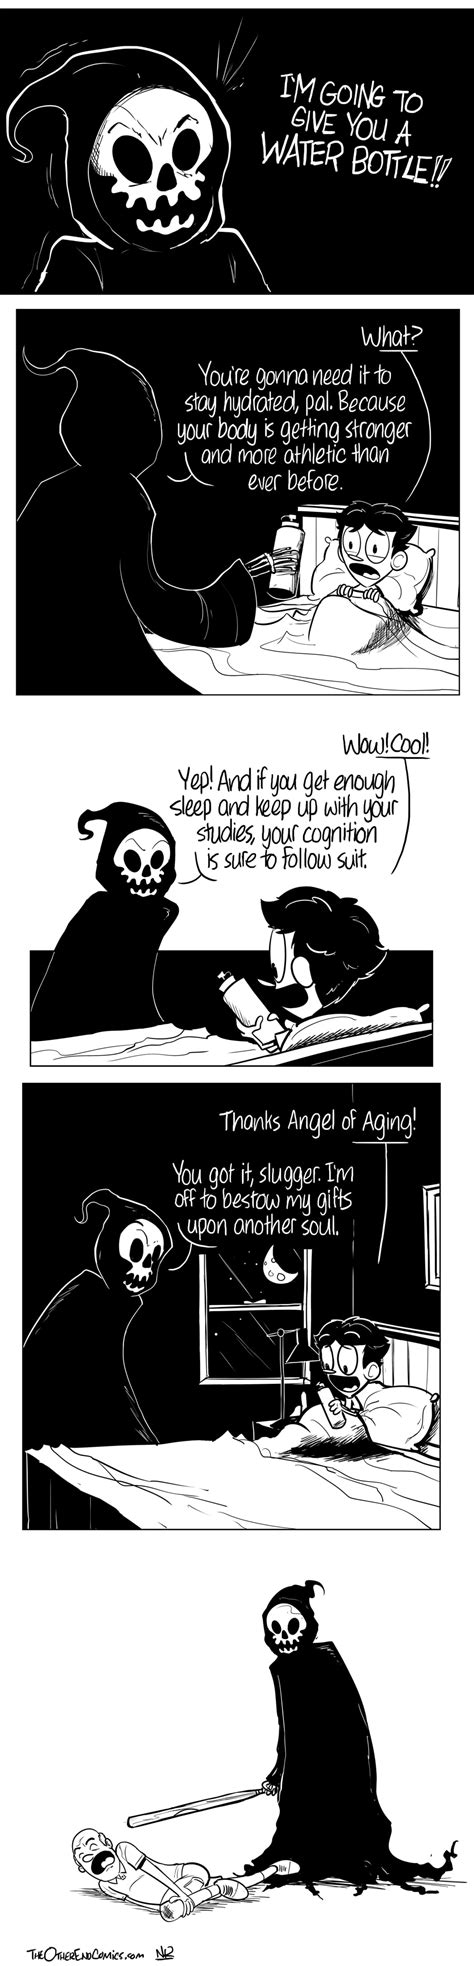 Read The Other End Comics Angel Of Aging Tapas Comics